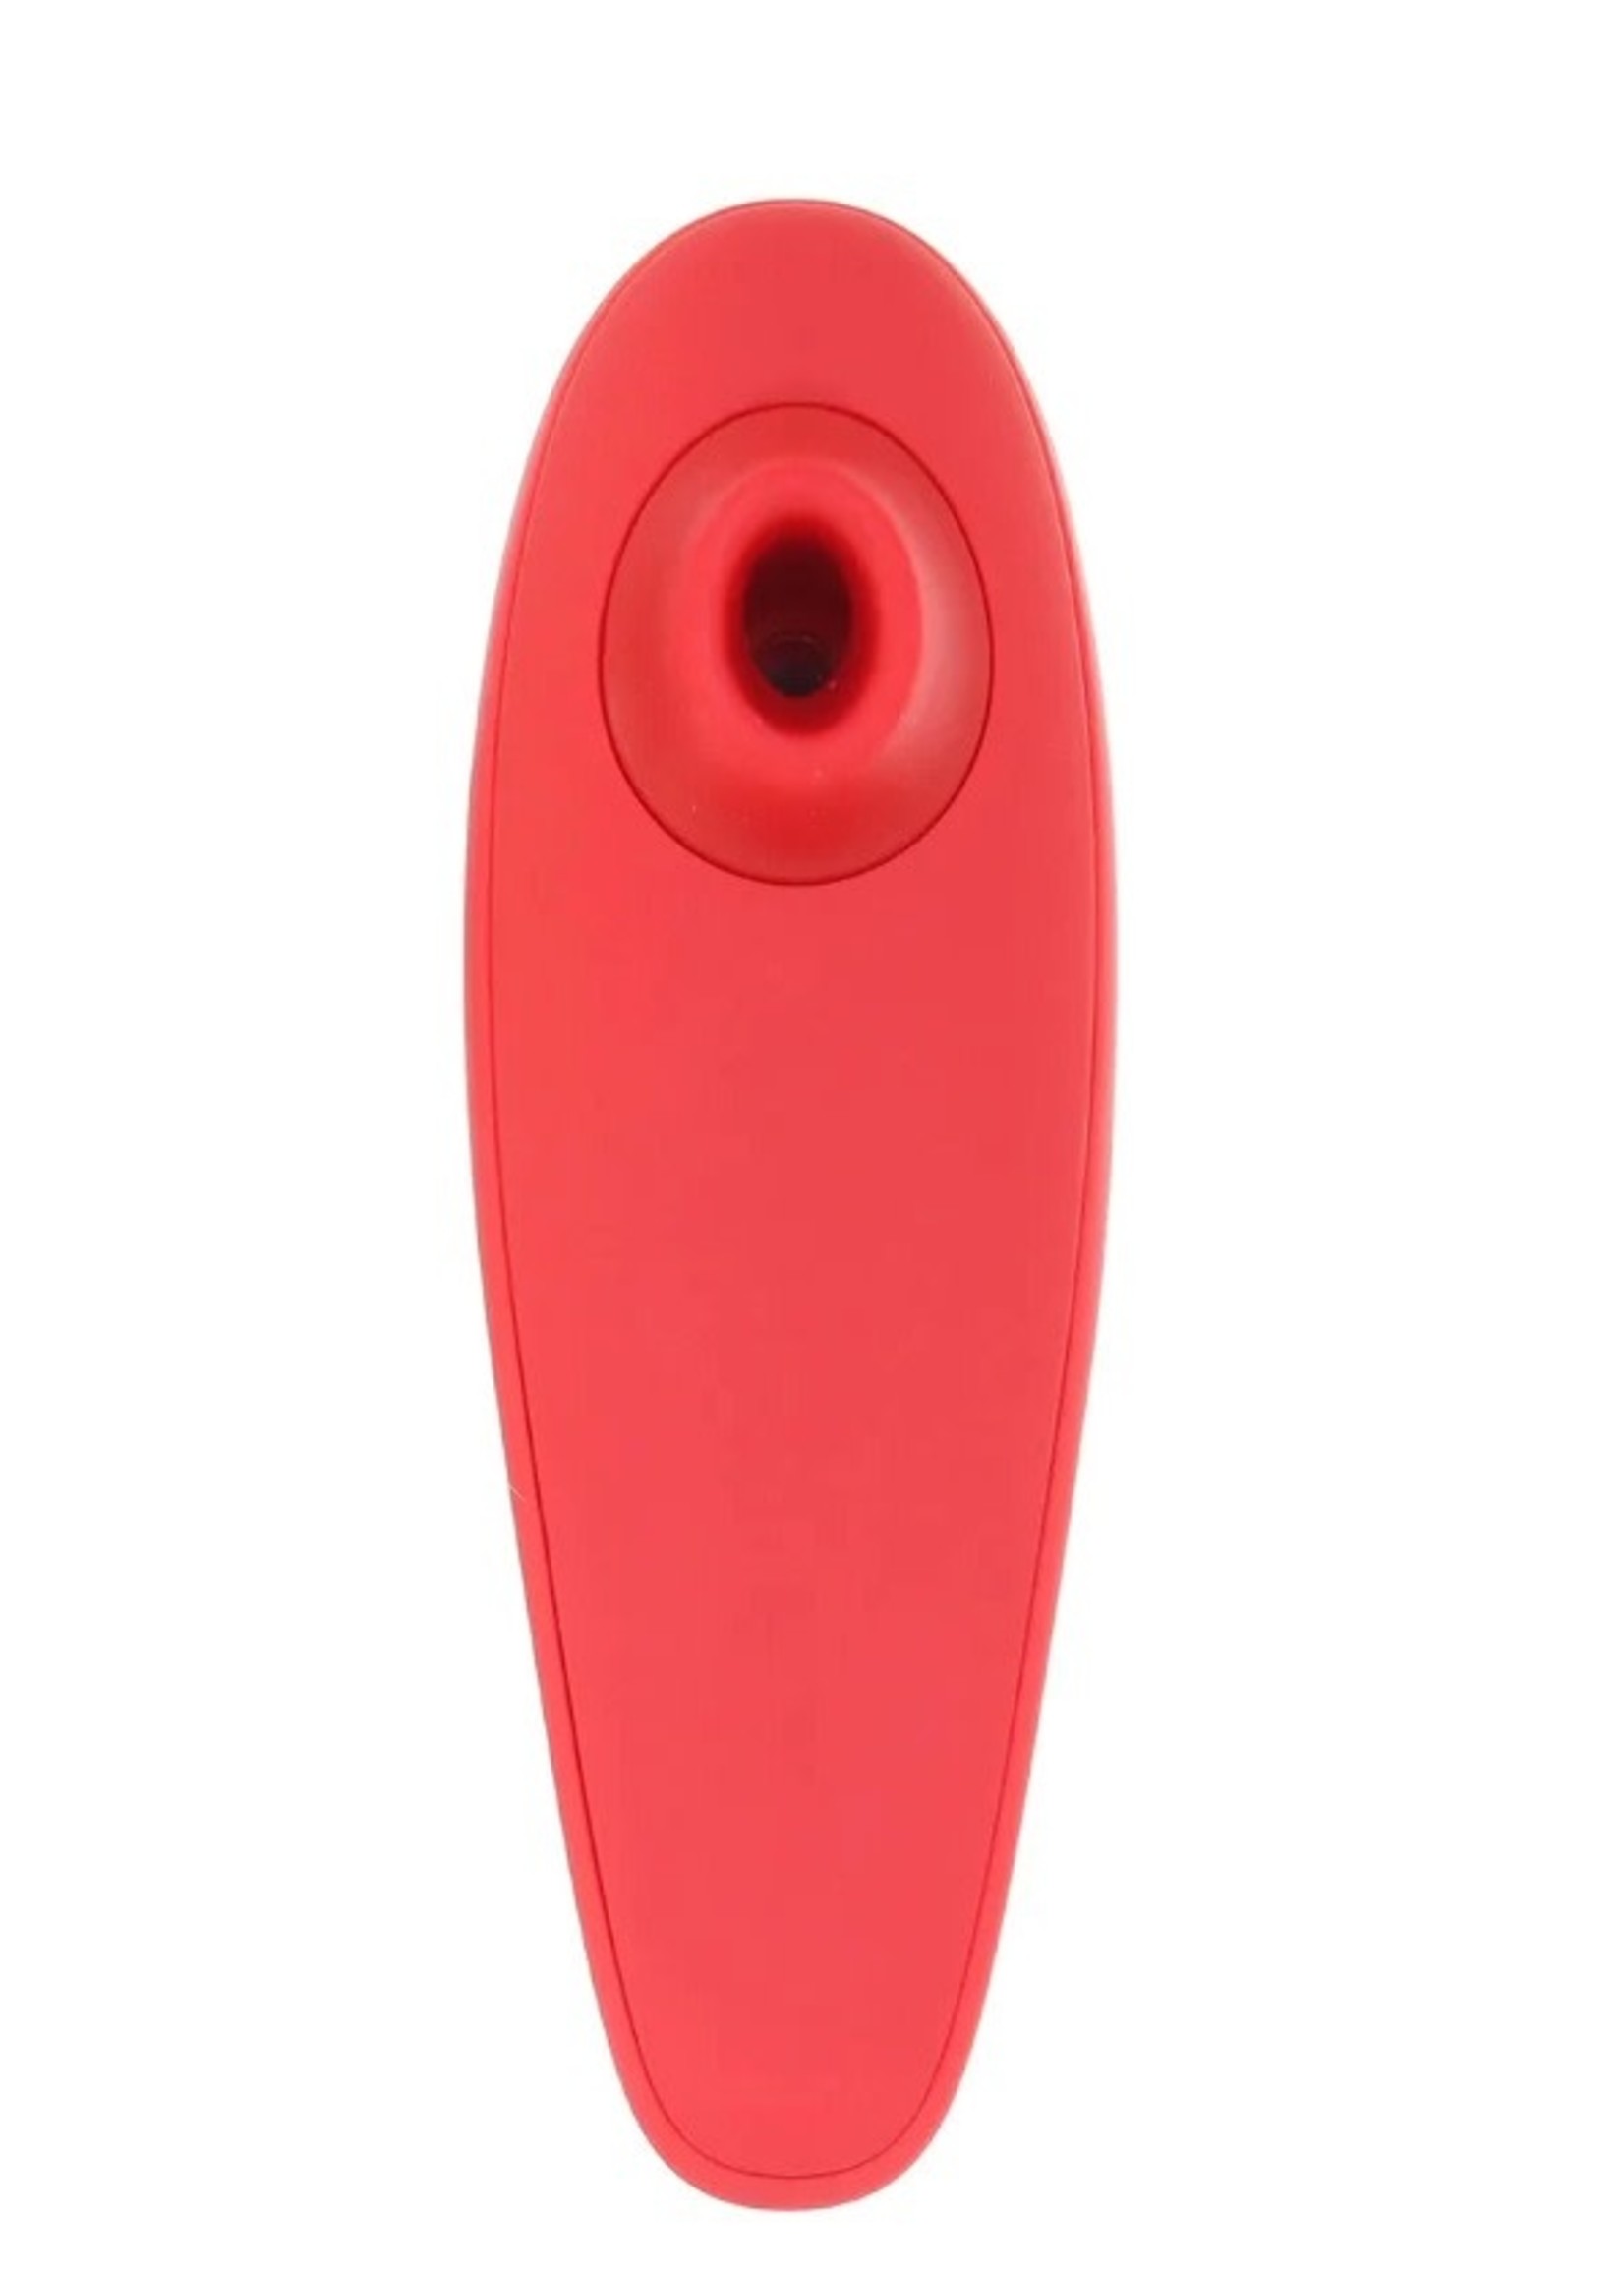 Womanizer Marilyn Monroe Special Edition in Vivid Red